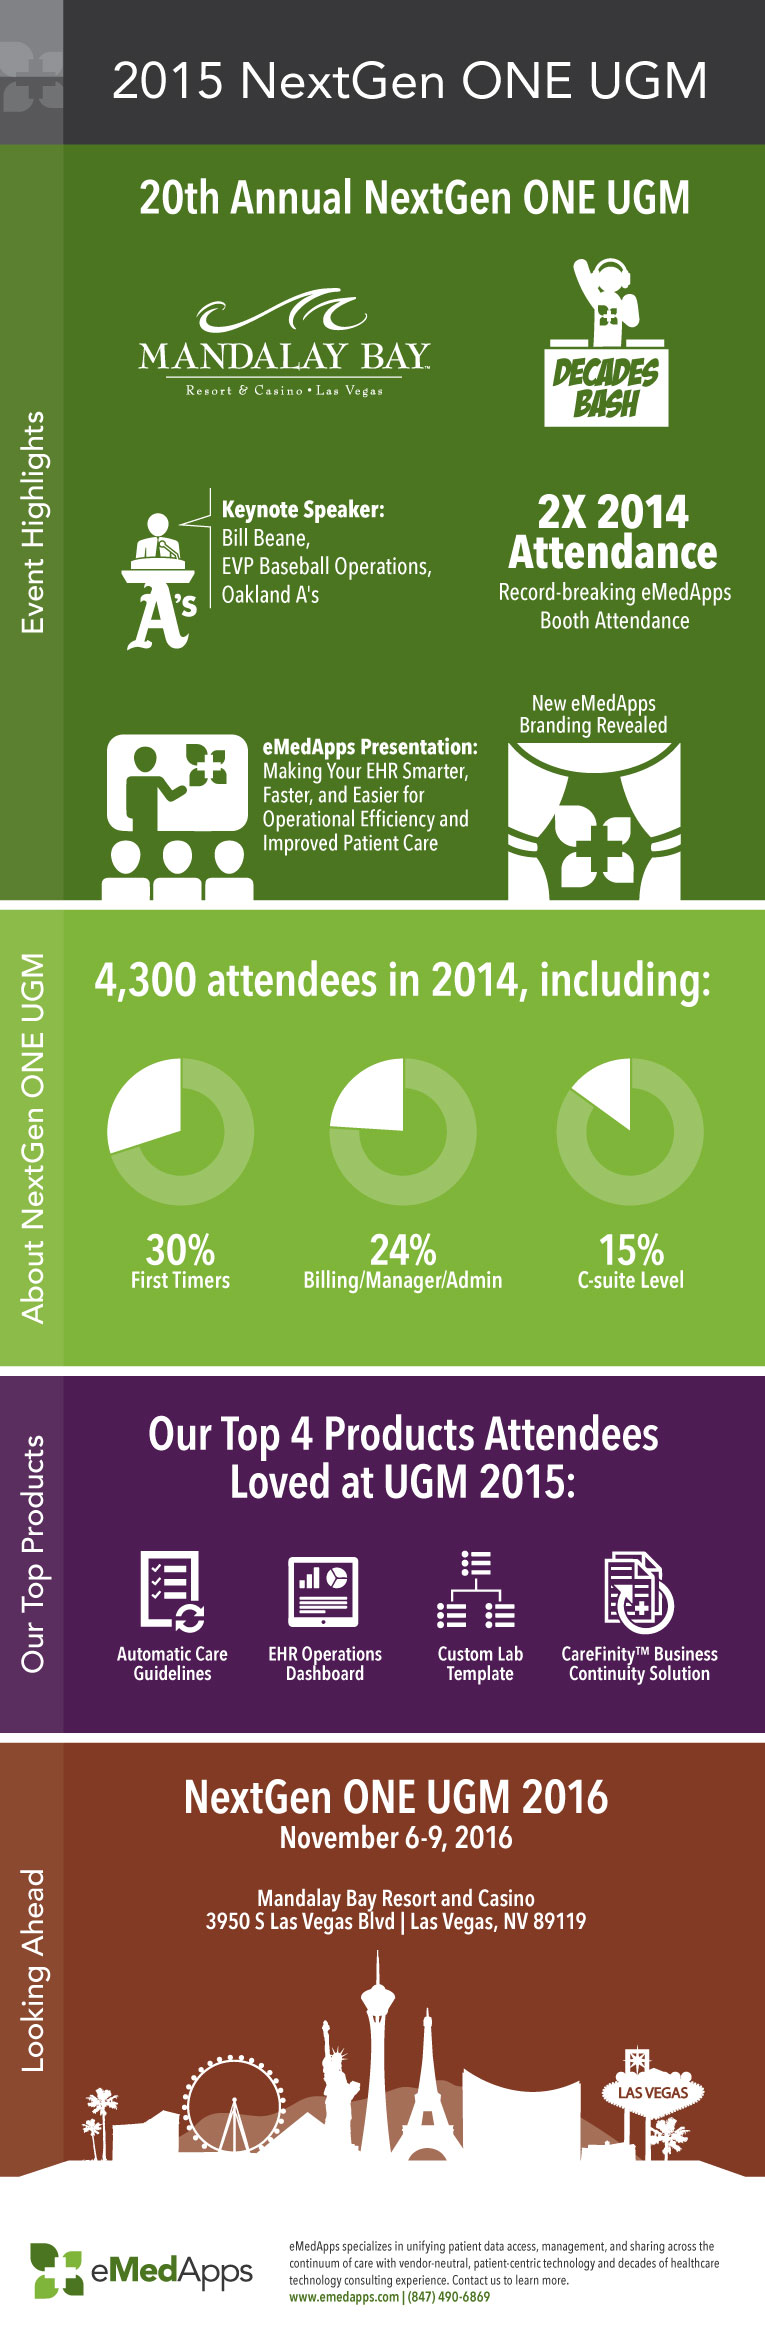 2015 NextGen ONE UGM Infographic from eMedApps